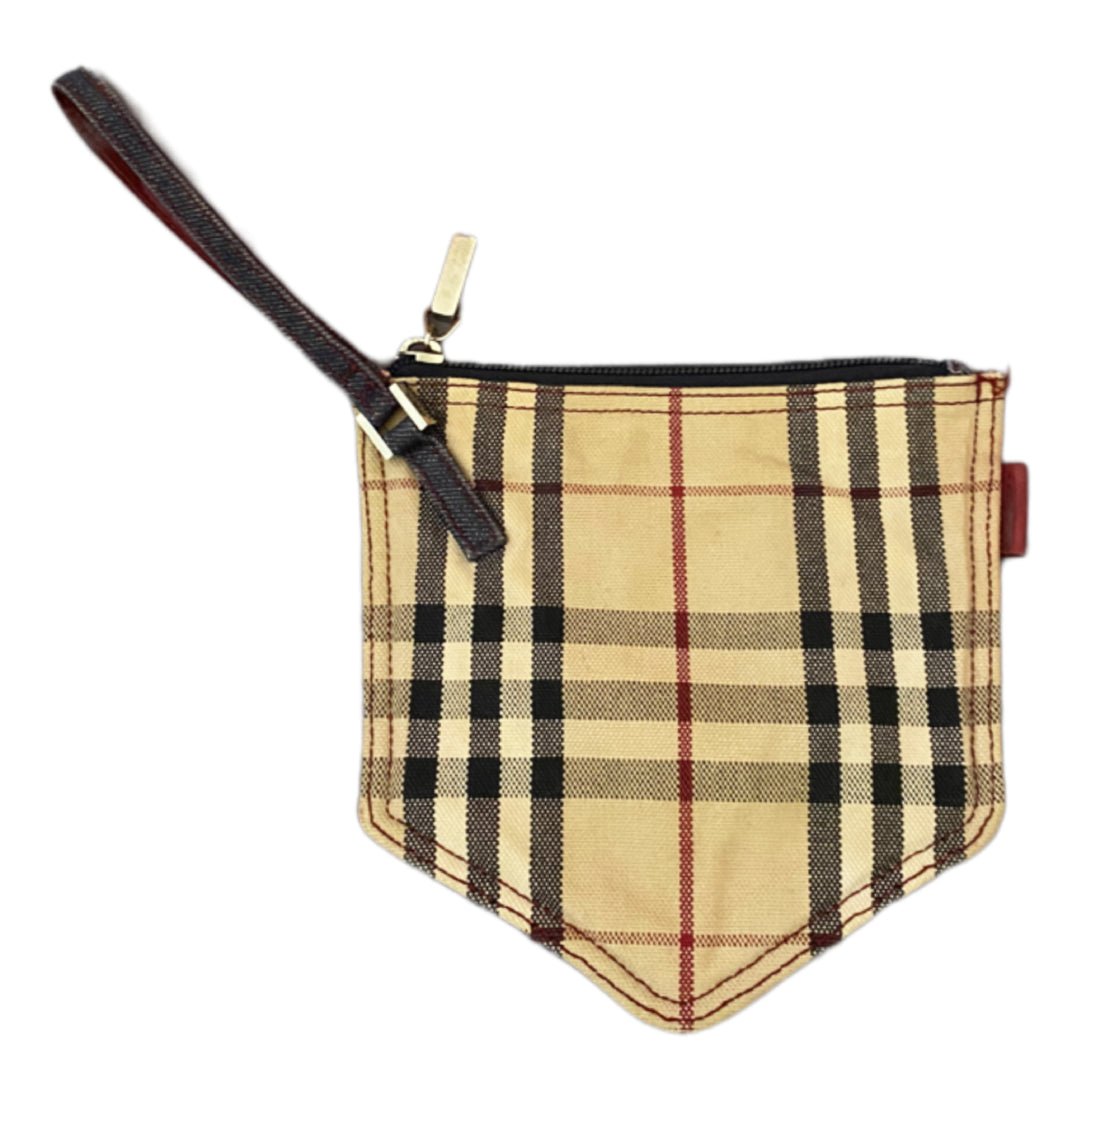 1990s Burberry Pocket Shaped Wristlet Pouch - style - CHNGR